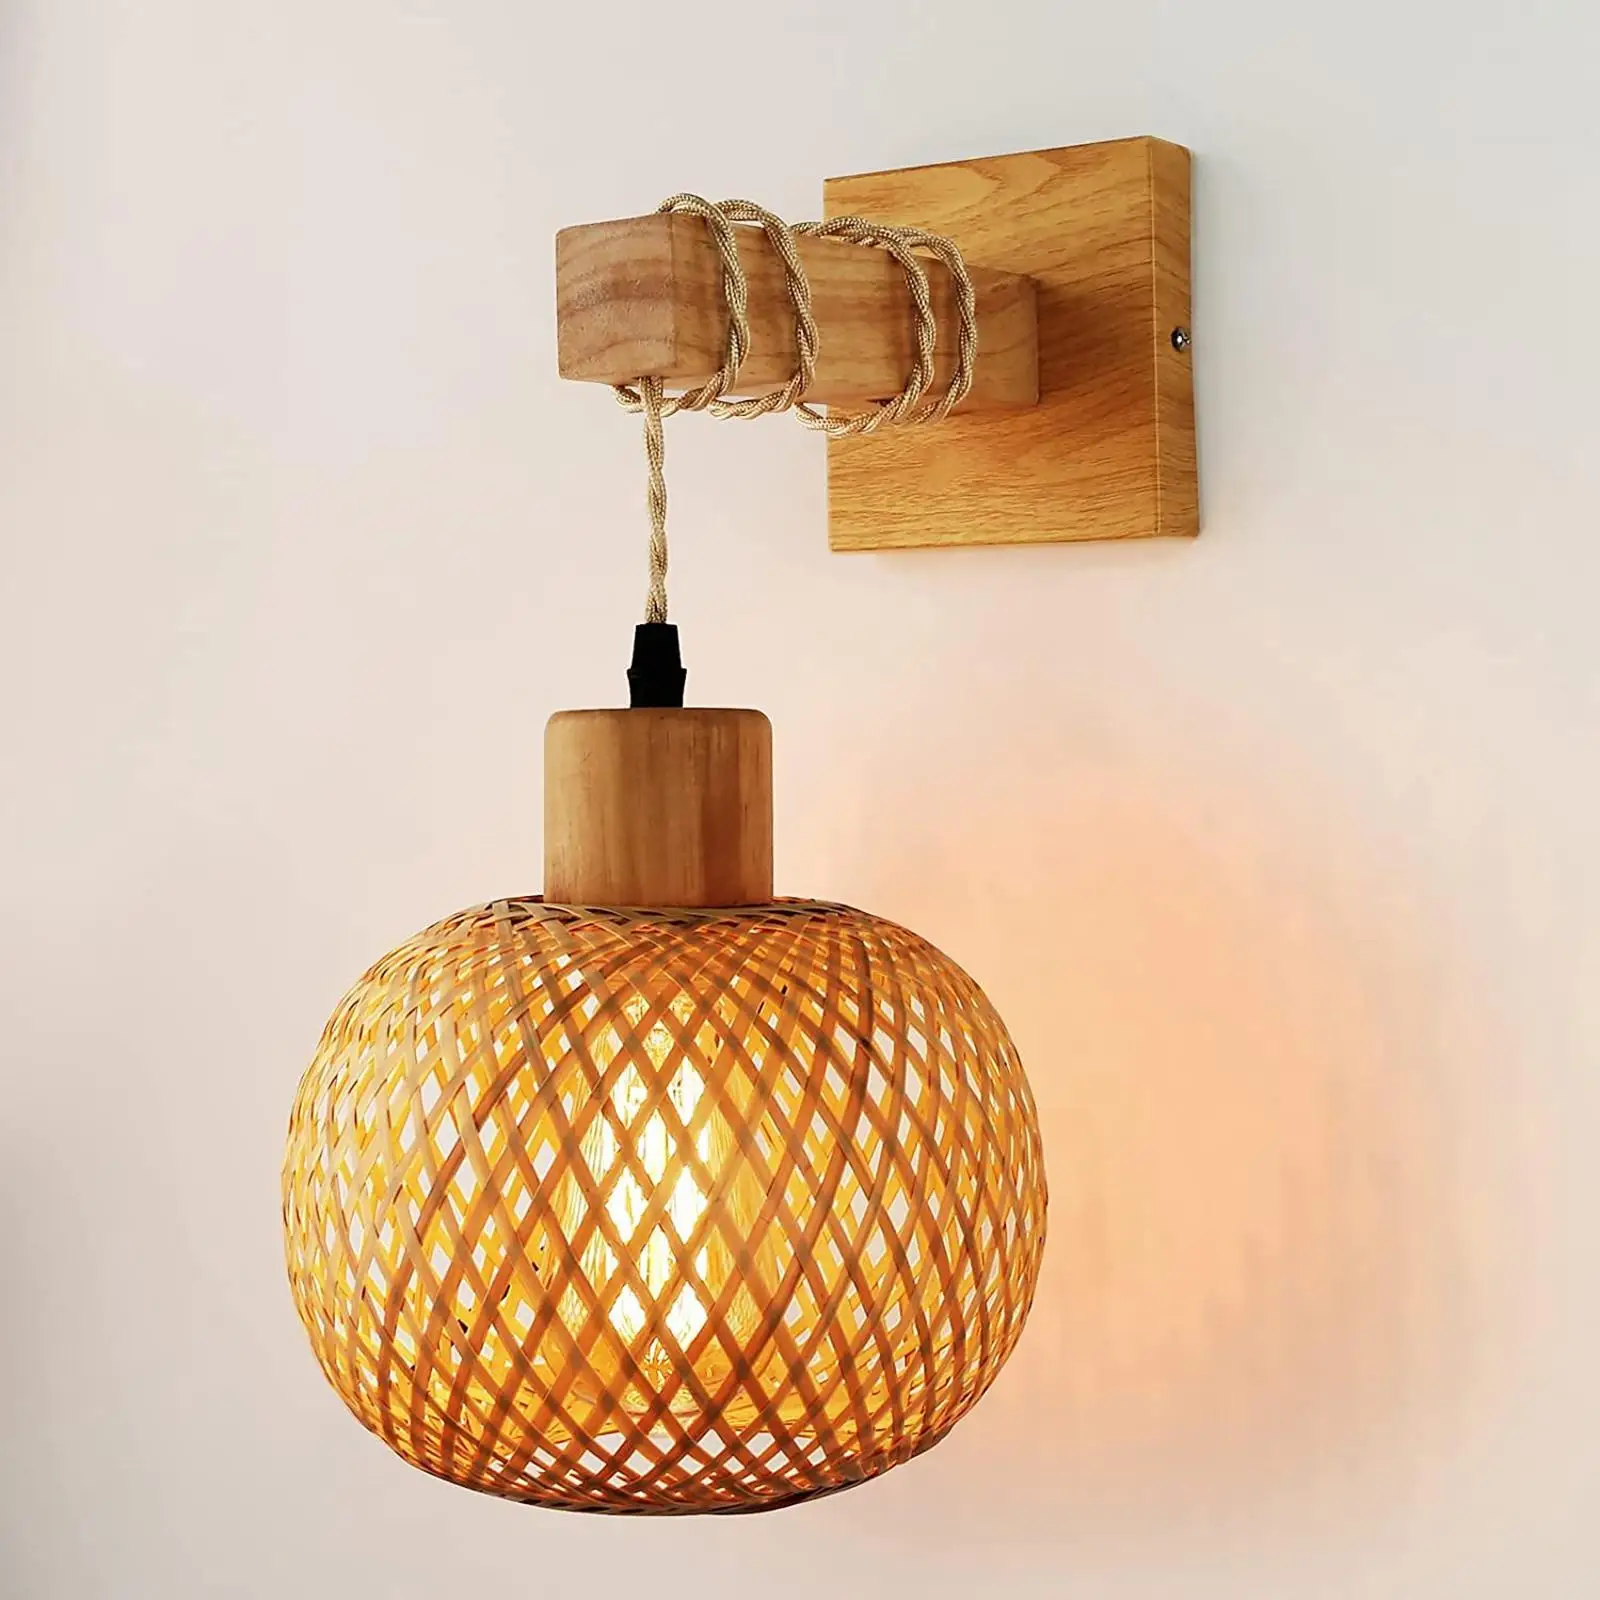 Rattan Wall Sconce Lighting, Rattan Lamps for Bedroom, Farmhouse Rustic Wall